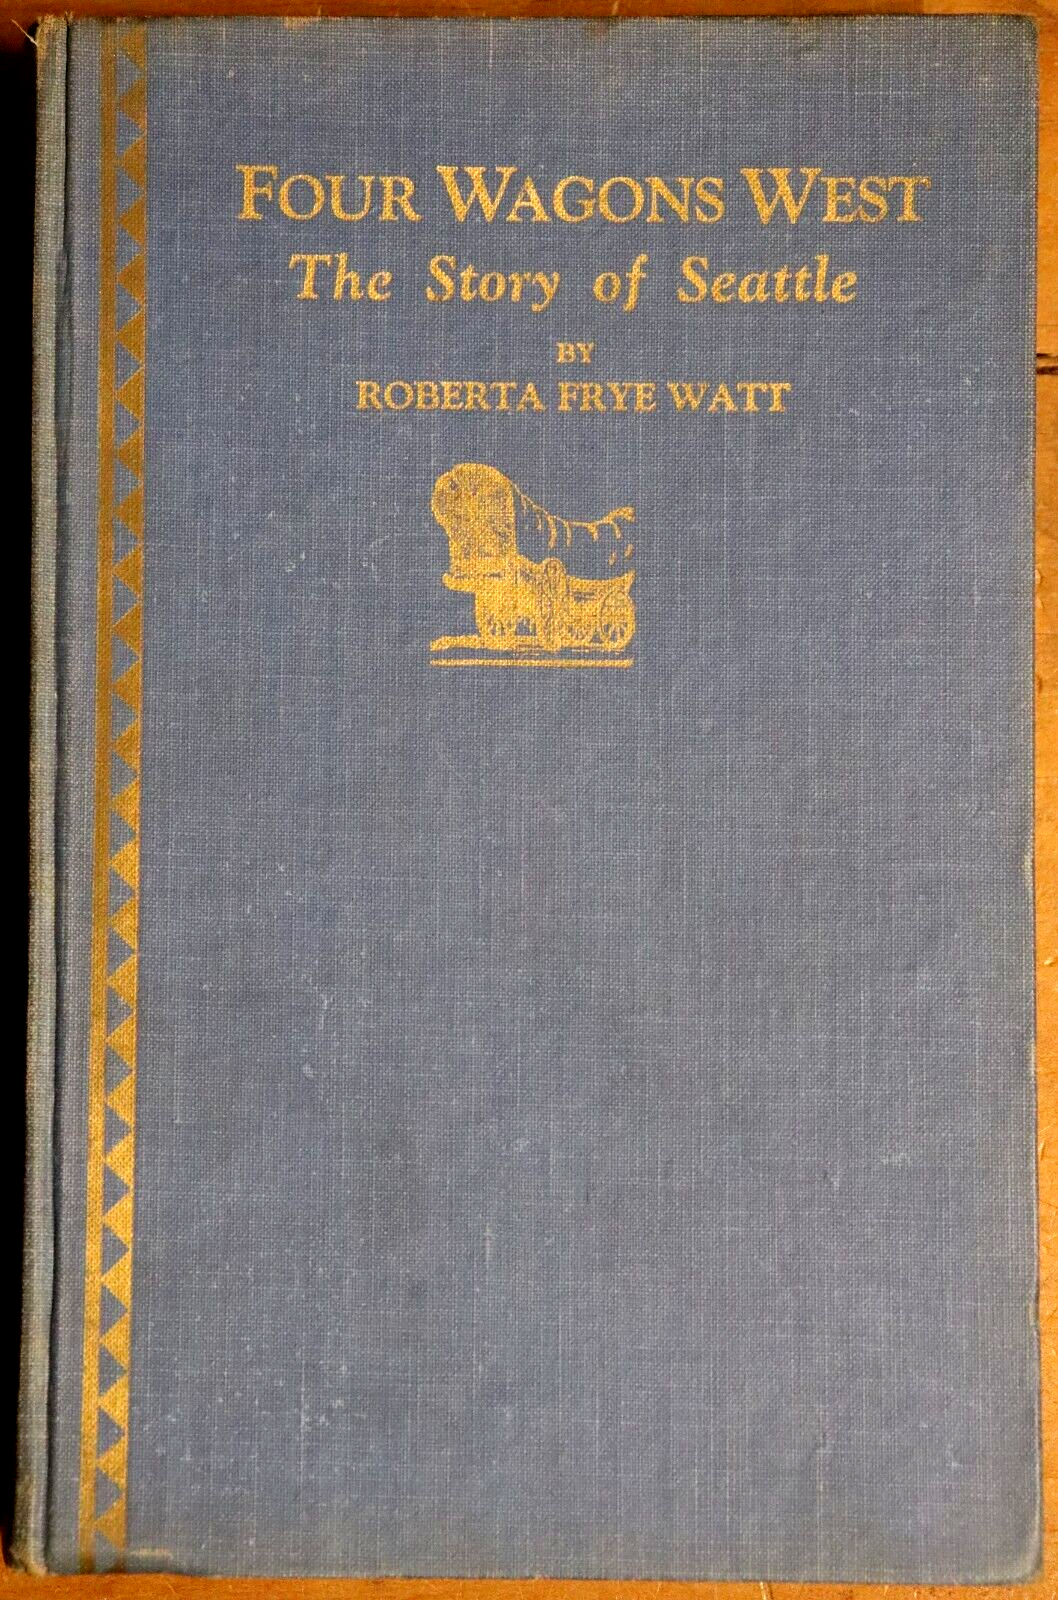 Four Wagons West: The Story of Seattle - 1931 - Antique American History Book